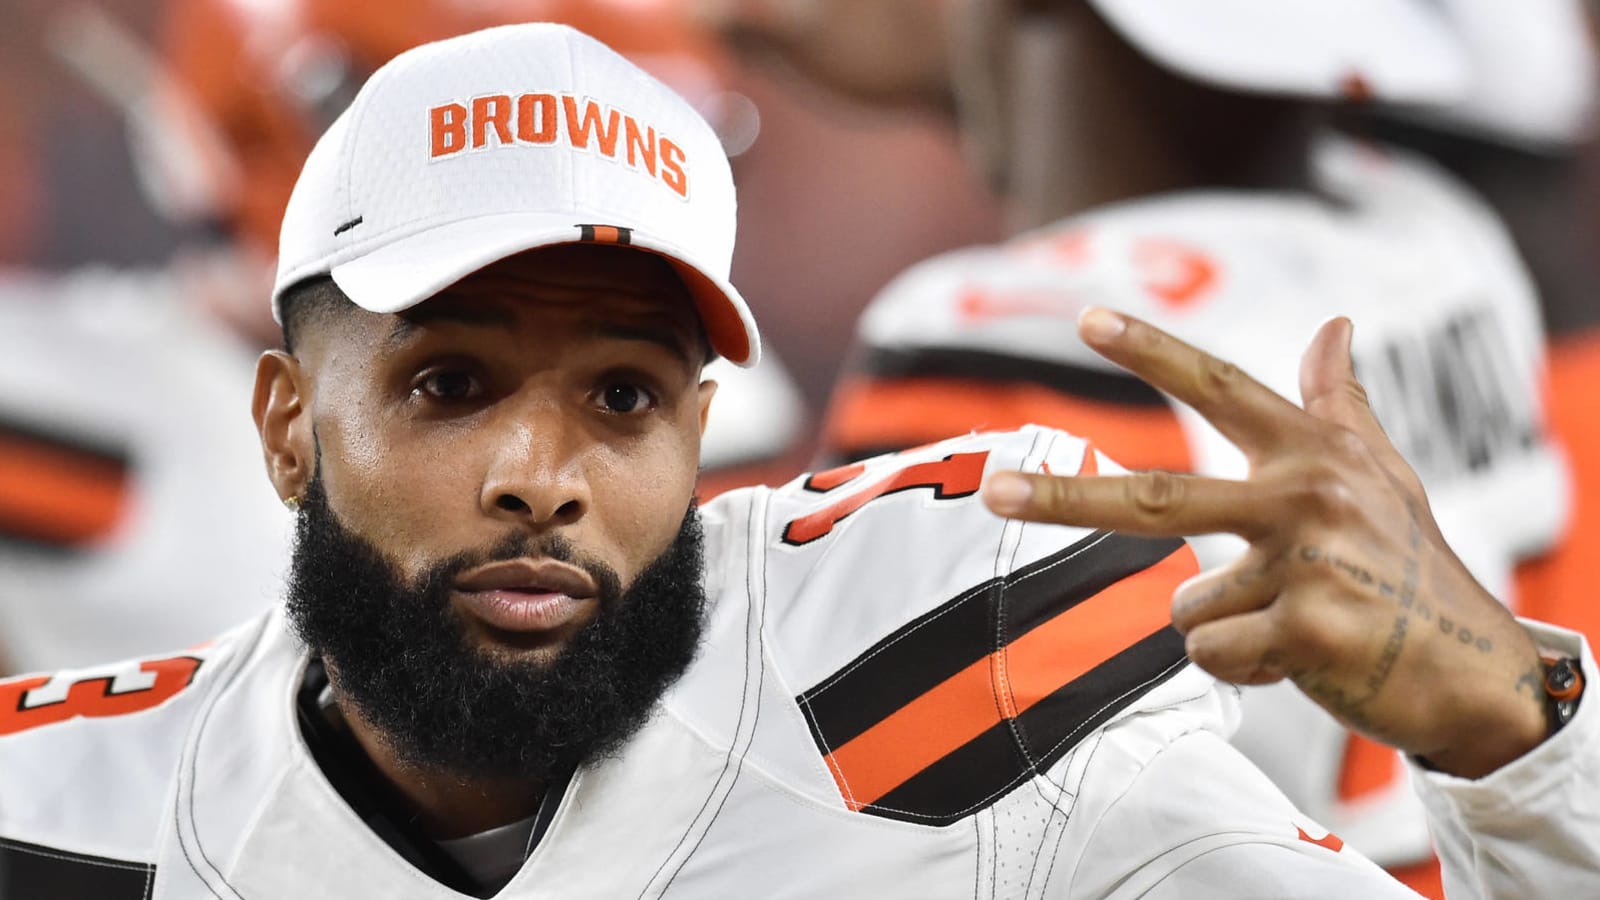 Trade Odell Beckham Jr.? That's a losing bet for Browns